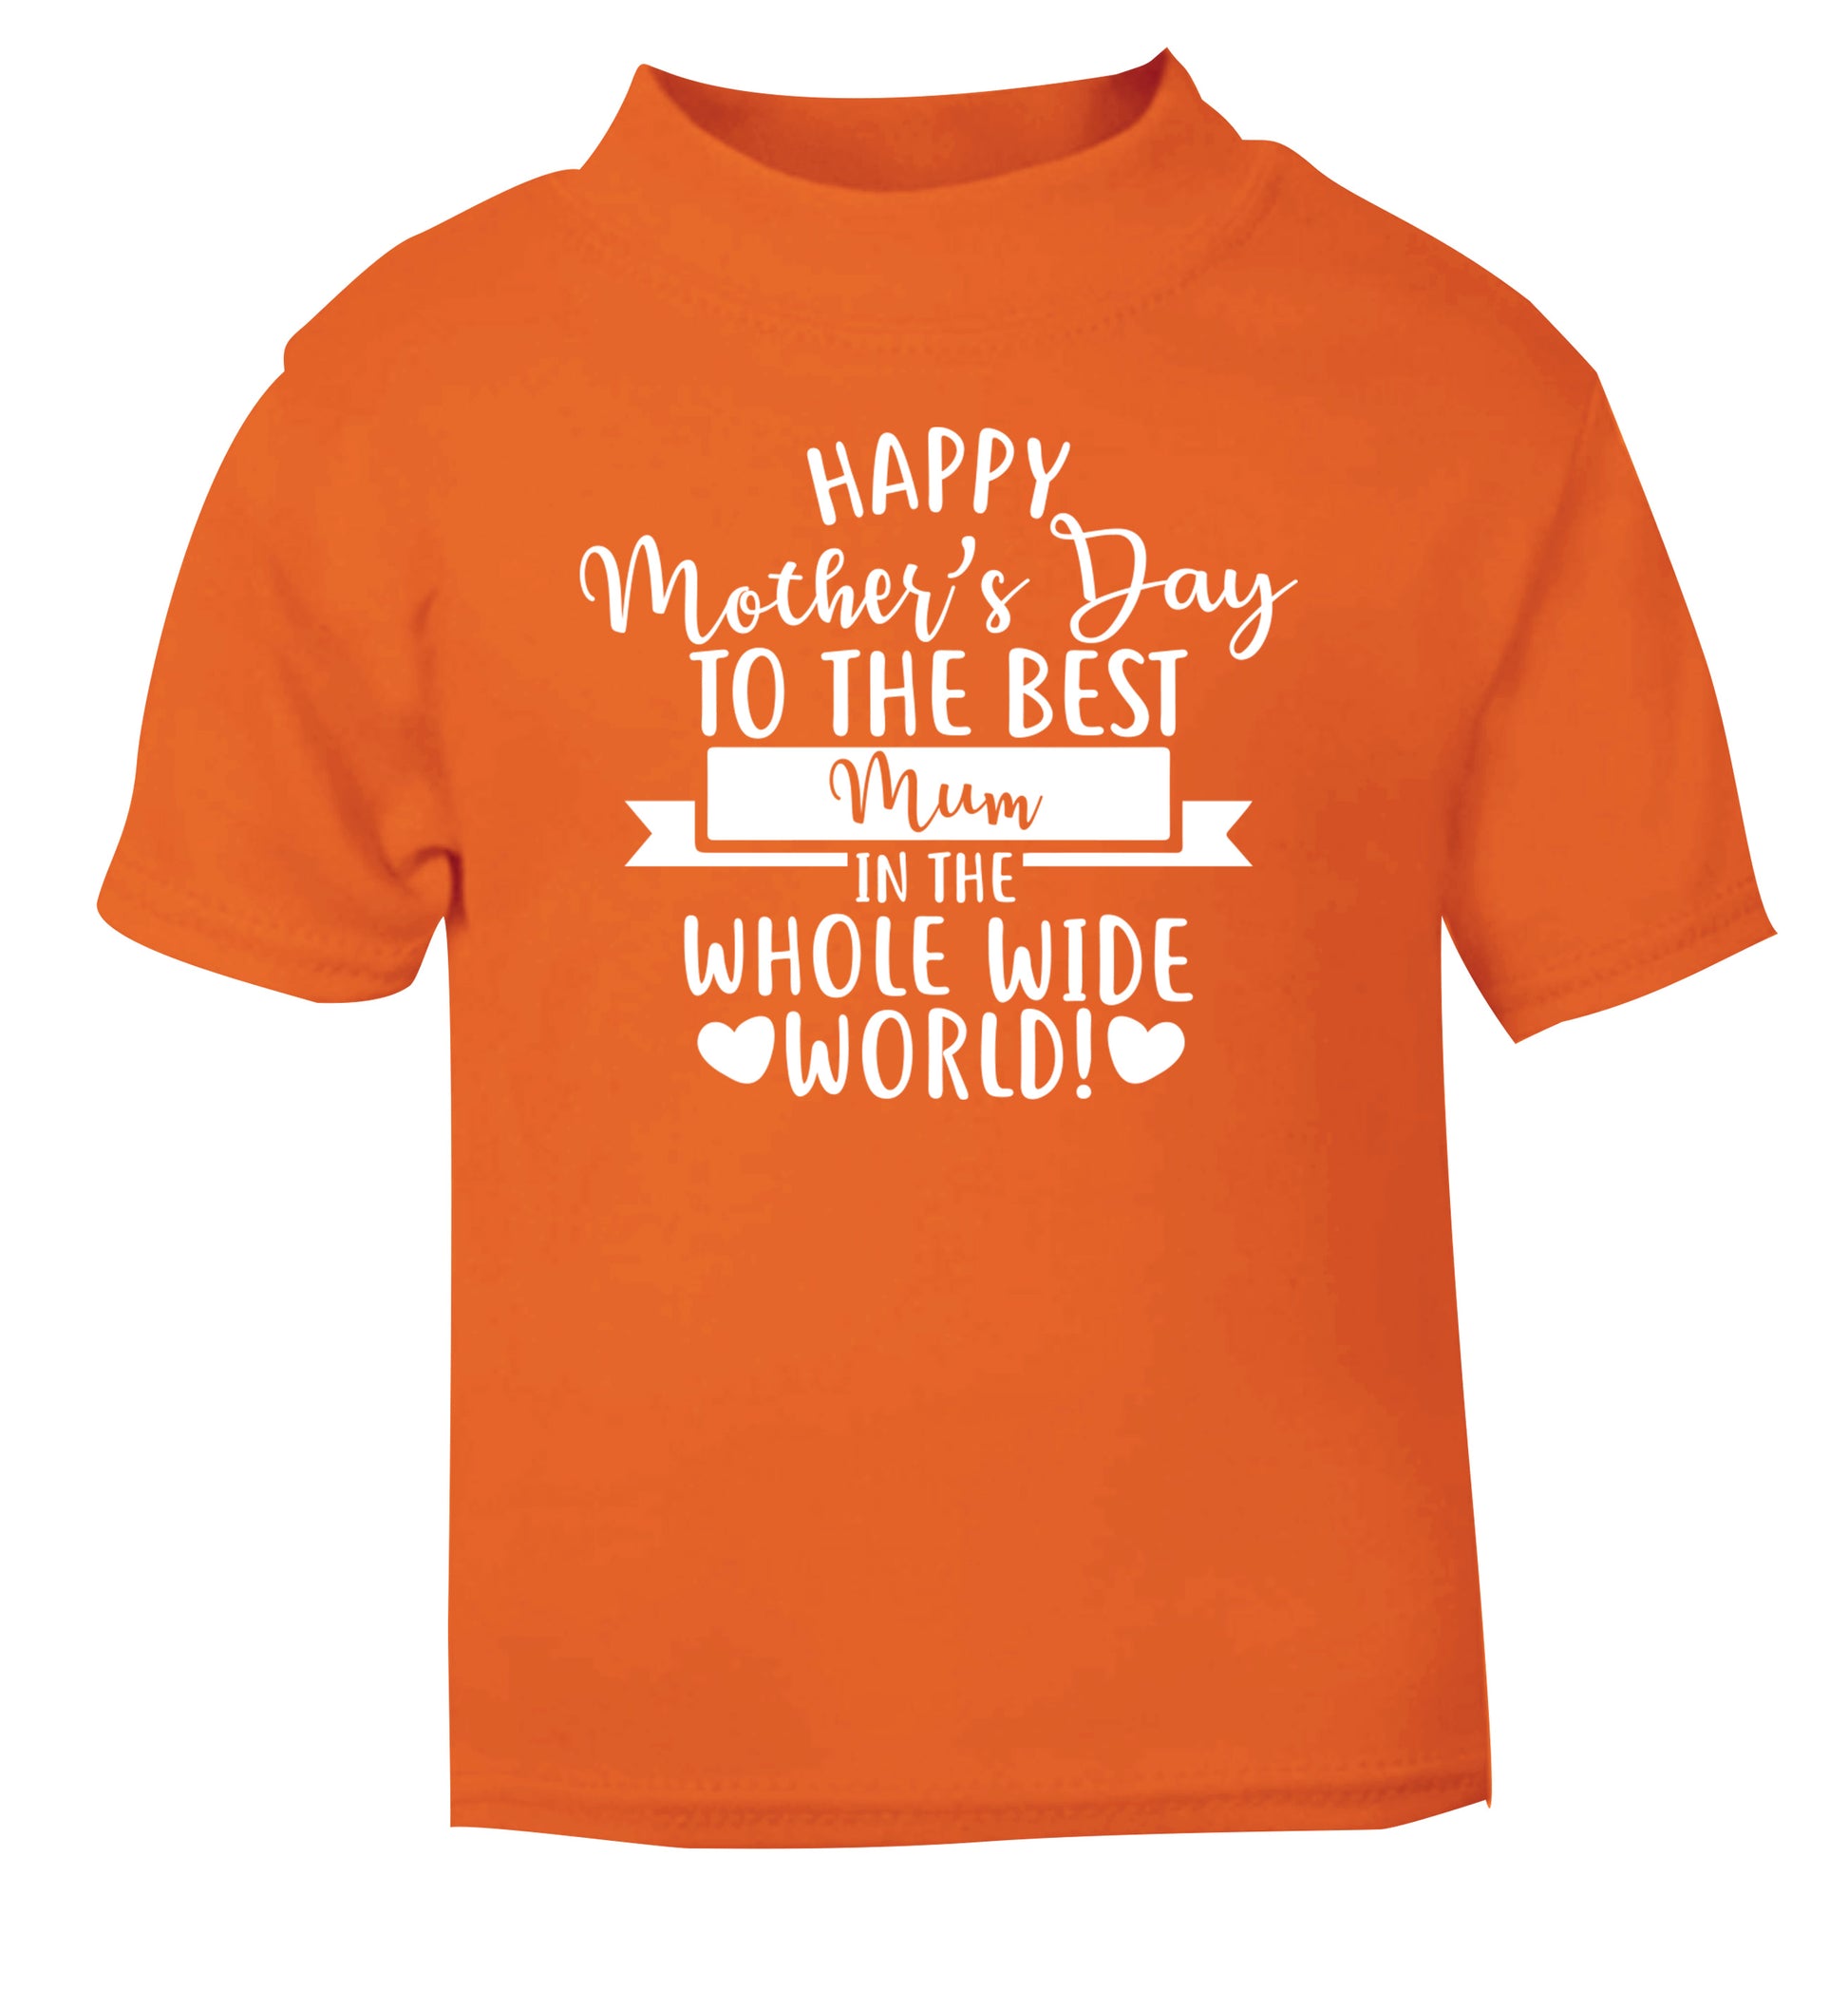 Happy Mother's Day to the best mum in the whole wide world! orange Baby Toddler Tshirt 2 Years